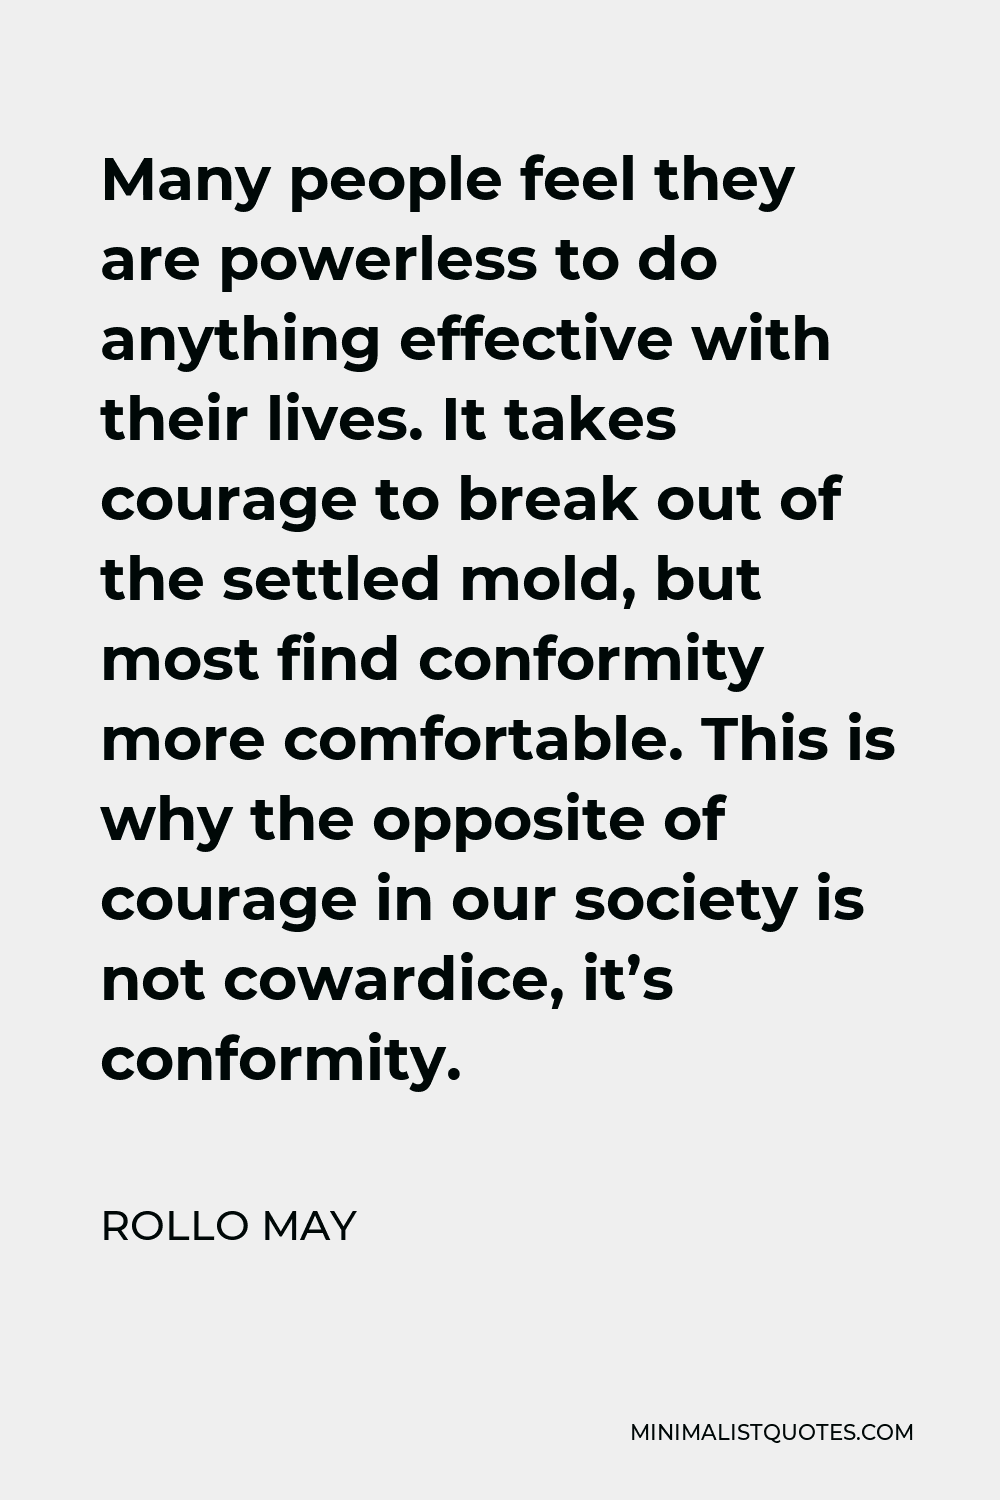 Rollo May Quote - Many people feel they are powerless to do anything effective with their lives. It takes courage to break out of the settled mold, but most find conformity more comfortable. This is why the opposite of courage in our society is not cowardice, it’s conformity.